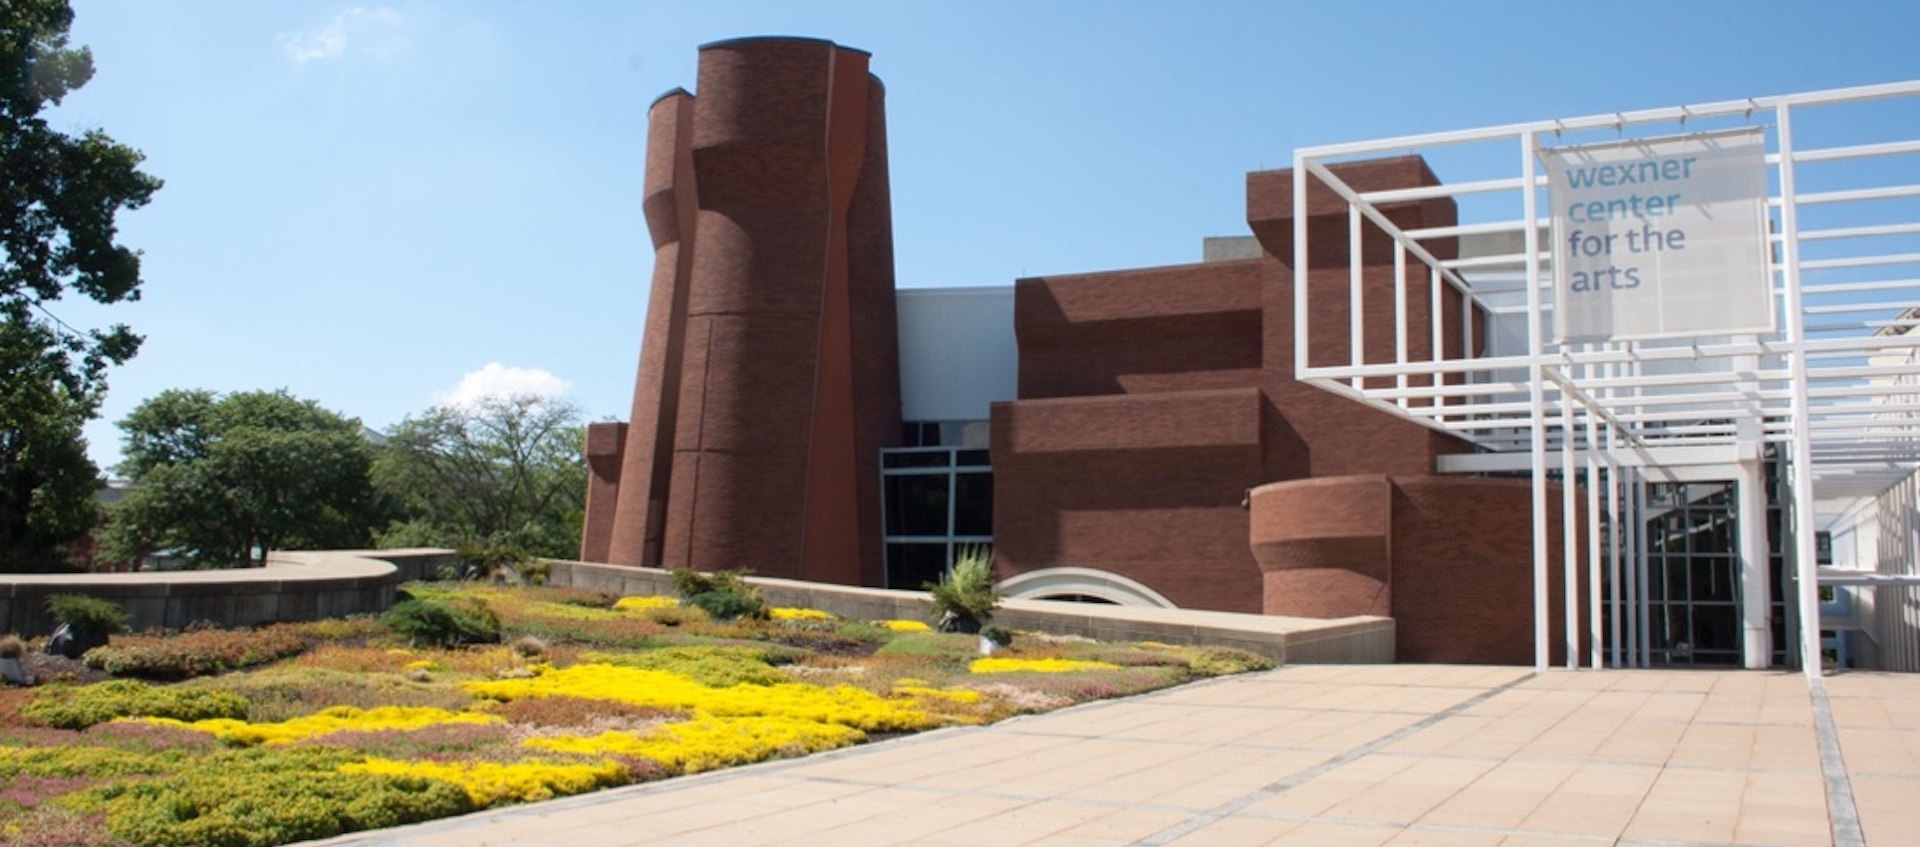 an exterior photograph of the south-facing side of the Wexner Center for the Arts at the Ohio State University, showing the deconstructed brick turrets, the external white metal grid, and an outdoor garden installation by Paula Hayes